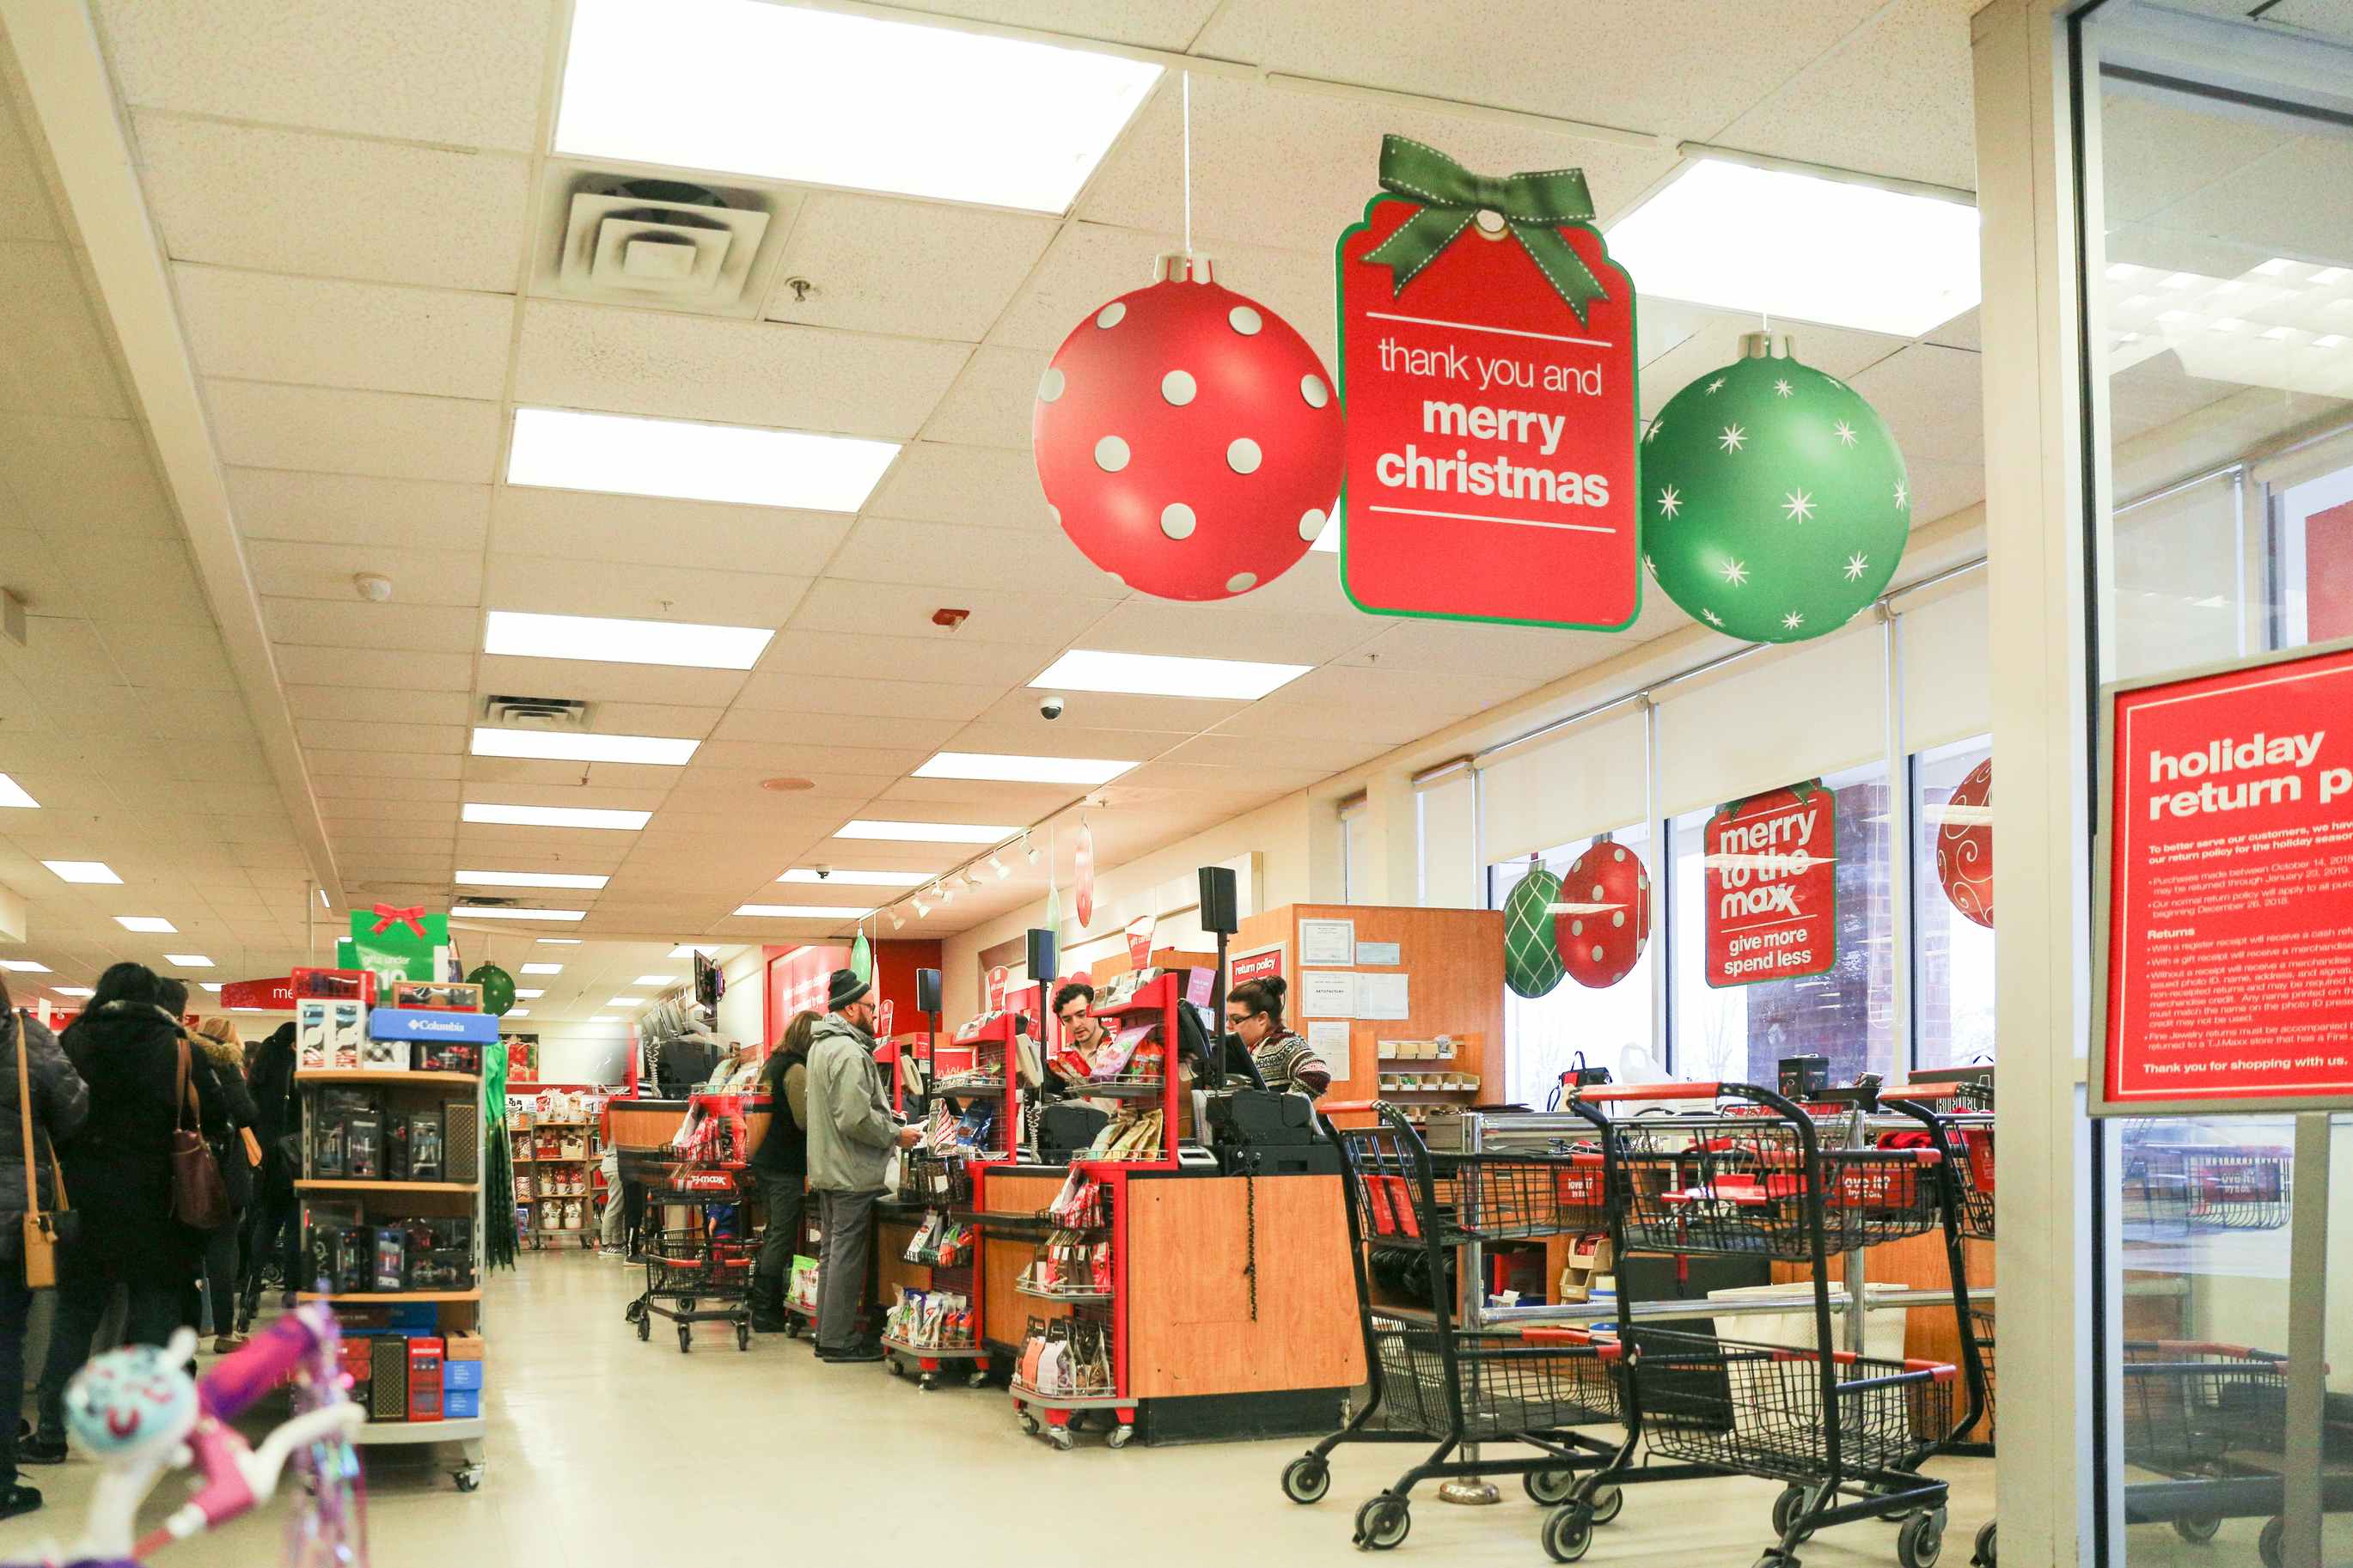 the checkout area inside a T.J. Maxx store with a sign that says Merry Christmas